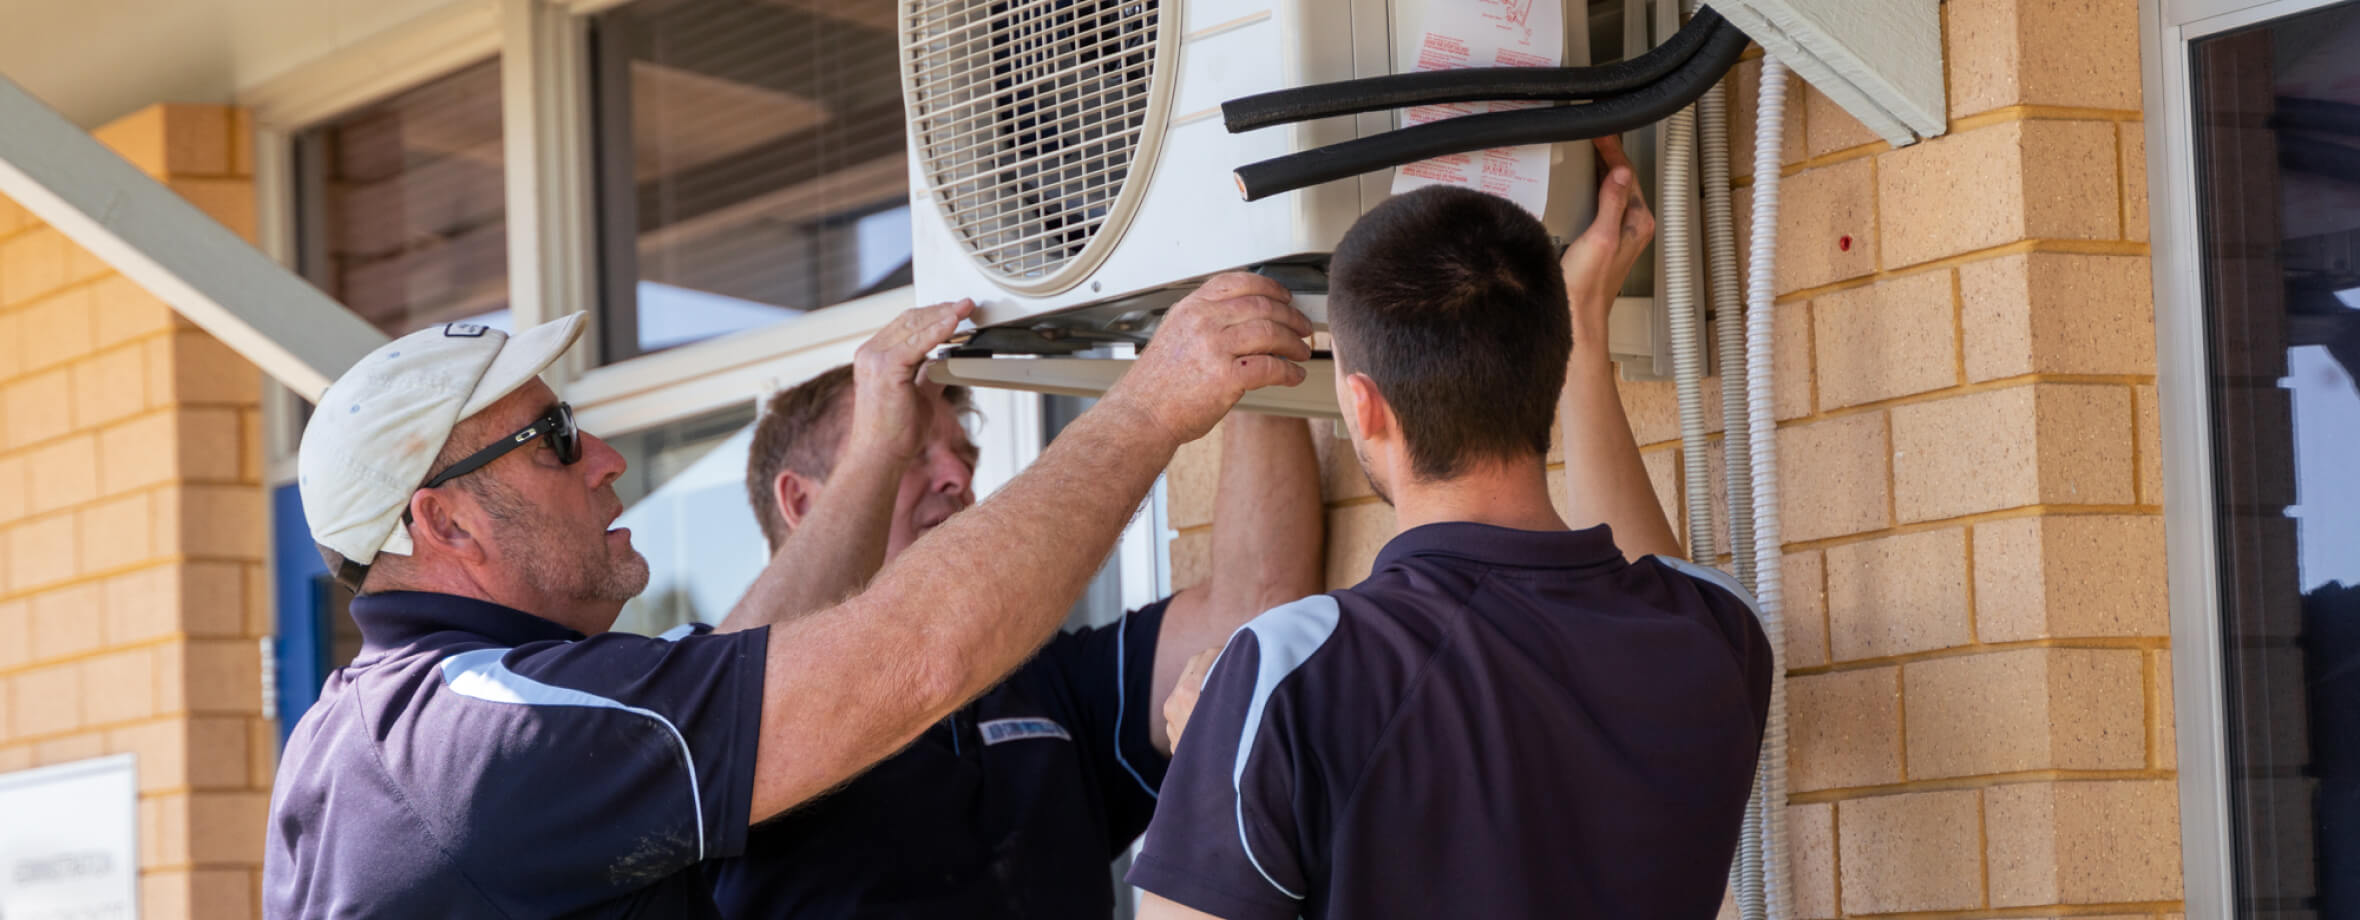 commercial air conditioner technician hanging up outdoor air conditioner unit